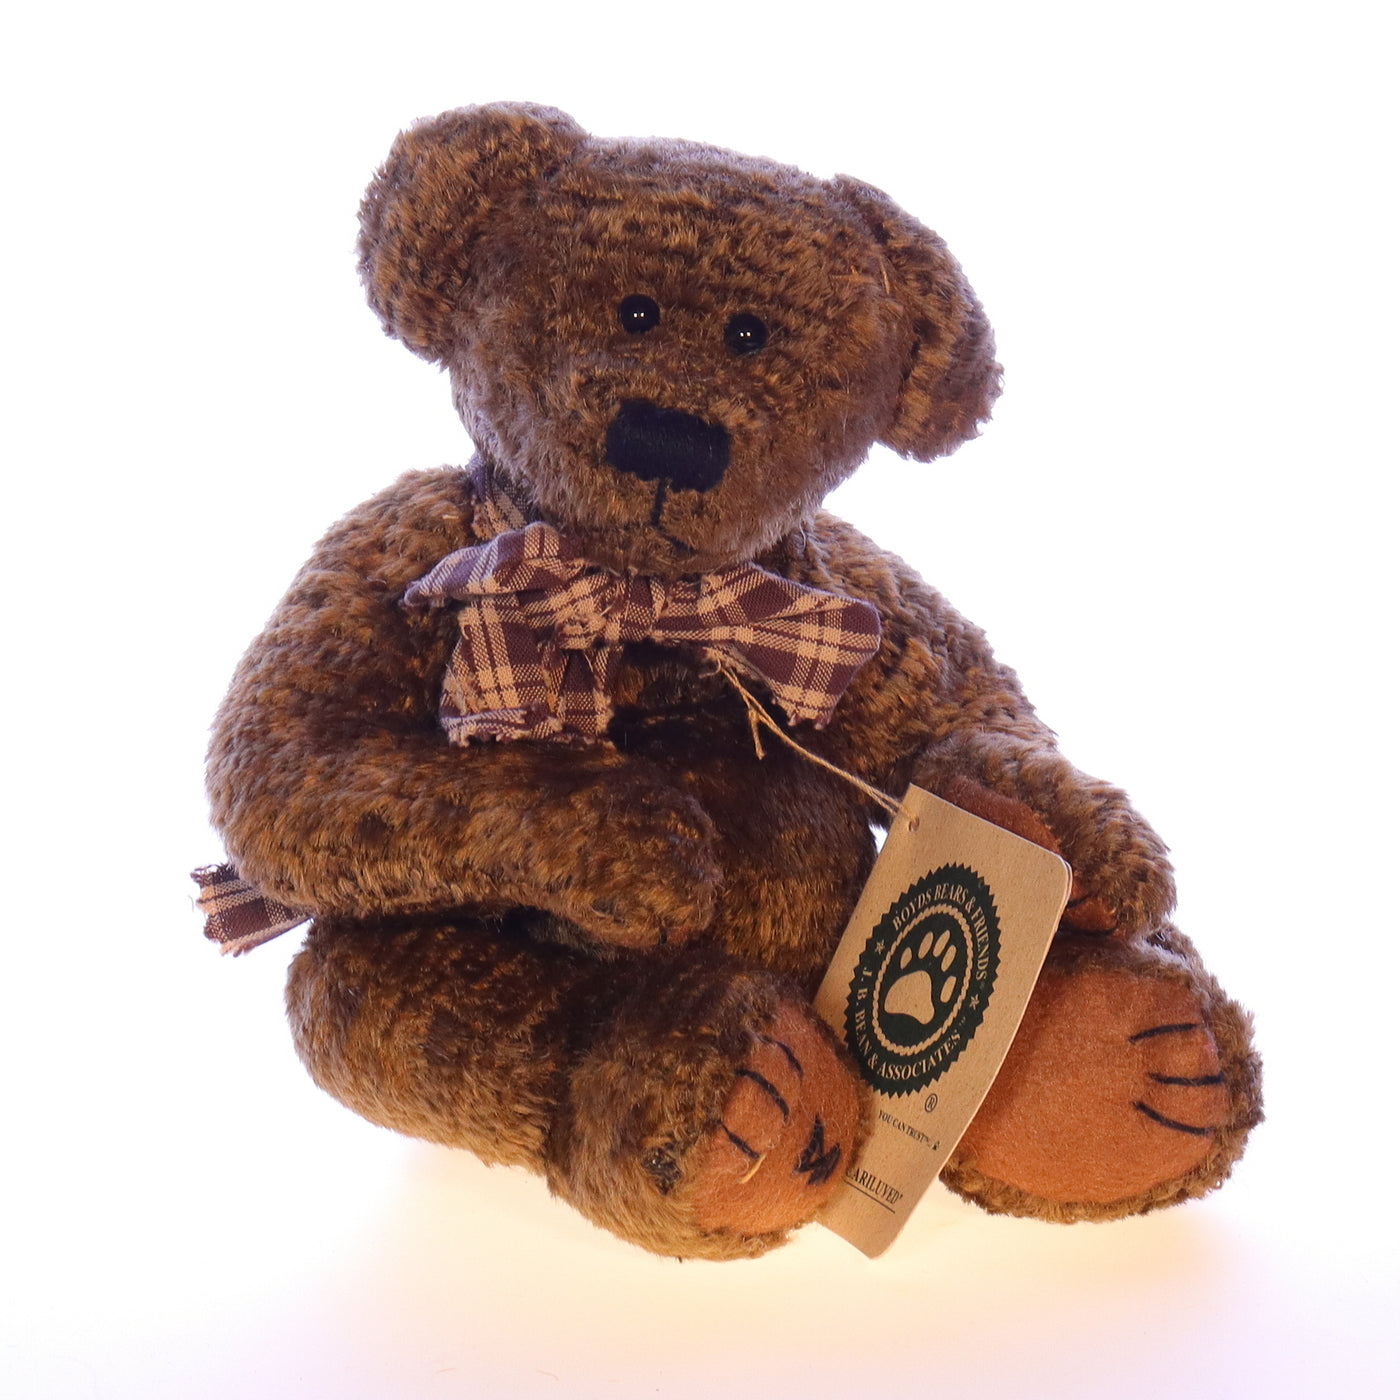 Boyds_Bears_and_Friends_51000-05_Scruffy_S_Beariluved_JB_Bean_and_Associates_Stuffed_Animal_1985 Front View